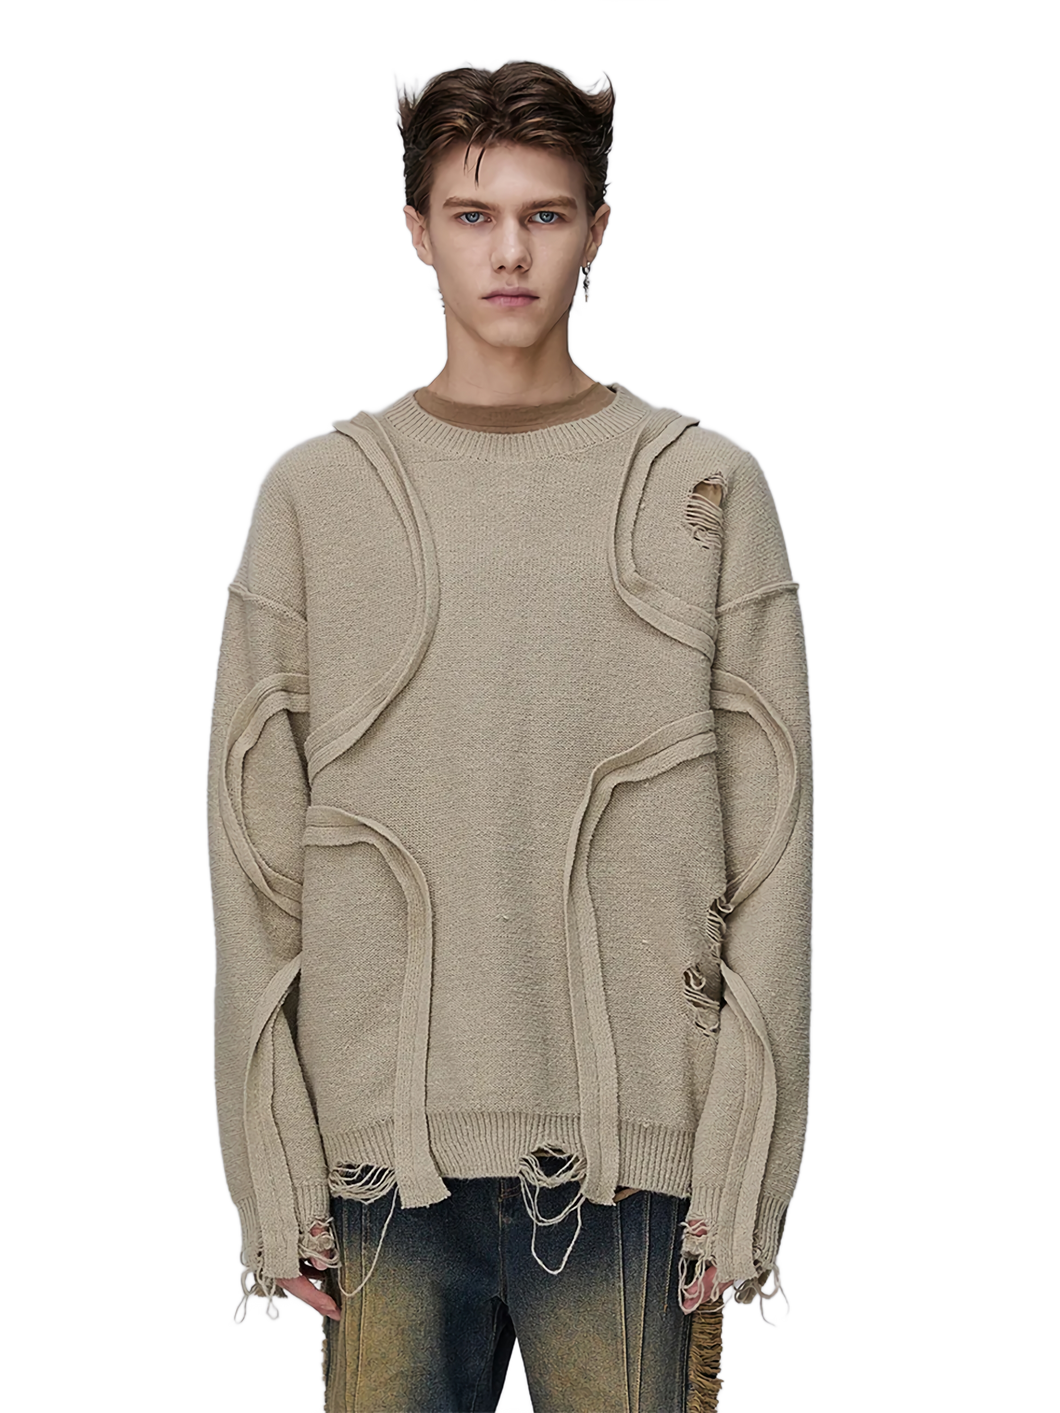 Distressed Loop-Textured Sweater in Neutral Tone